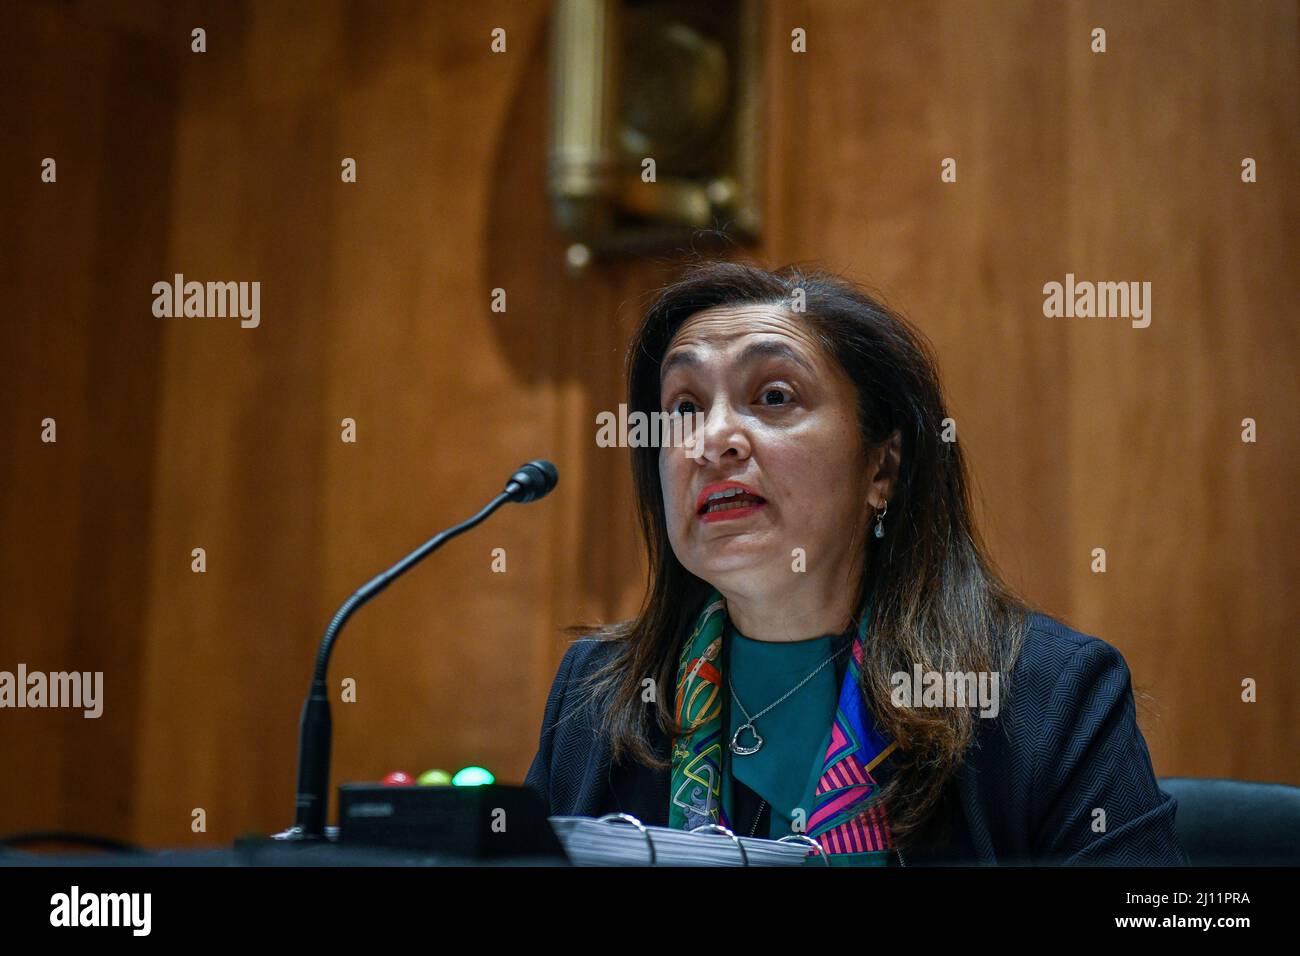 Washington, United States Of America. 15th Mar, 2022. Uzra Zeya, Under Secretary for Civilian Security, Democracy, and Human Rights, U.S. Department of State, appears before a Senate Committee on Foreign Relations hearing to examine combatting authoritarianism, focusing on U.S. tools and responses, in the Dirksen Senate Office Building in Washington, DC, Tuesday, March 15, 2022. Credit: Rod Lamkey/CNP/AdMedia/Newscom/Alamy Live News Stock Photo